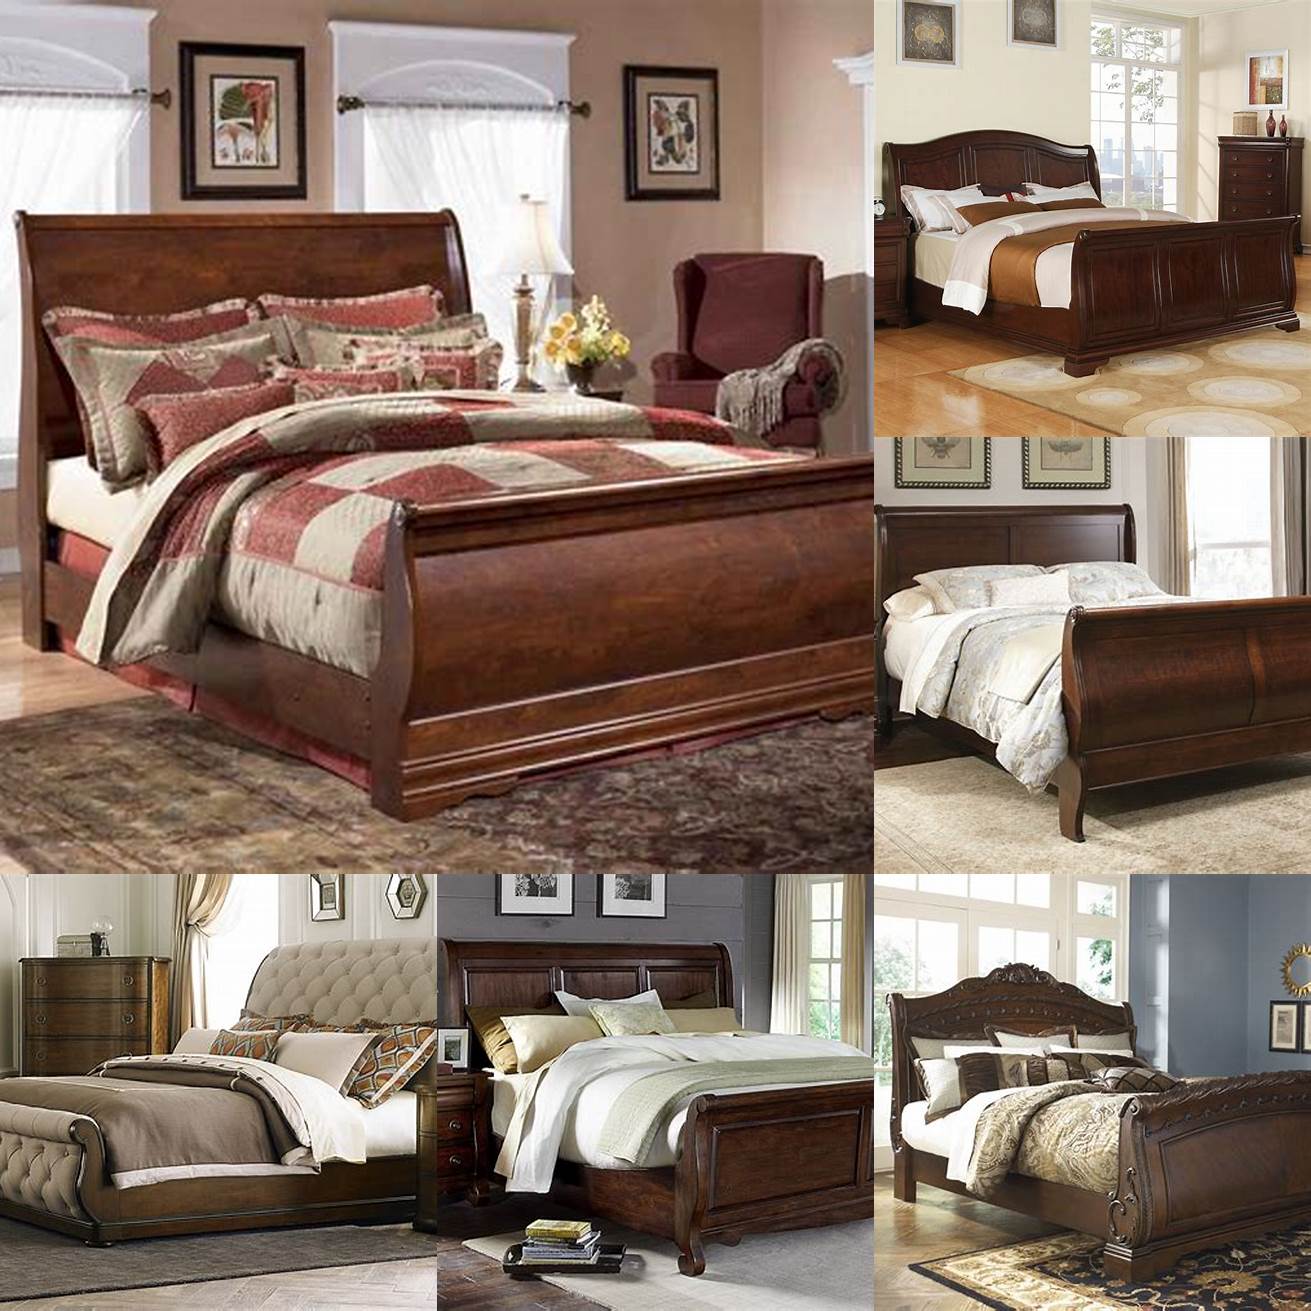 6 Queen Size Sleigh Bed with Canopy